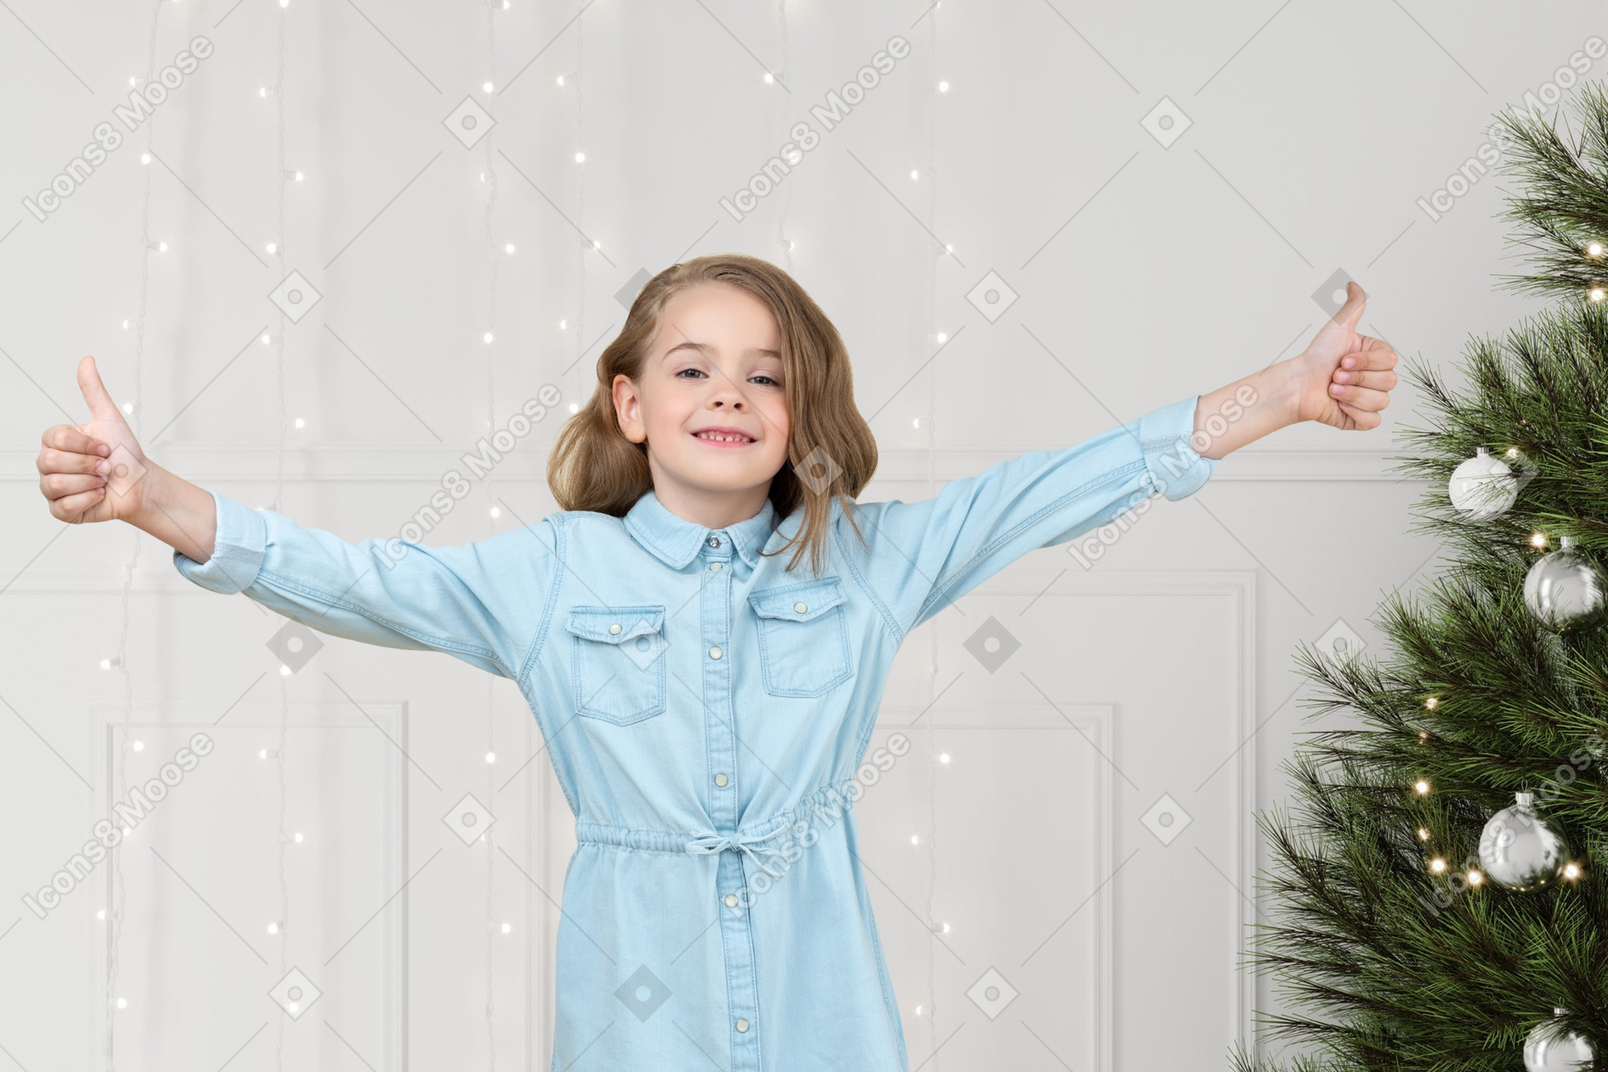 A little girl standing in front of a christmas tree